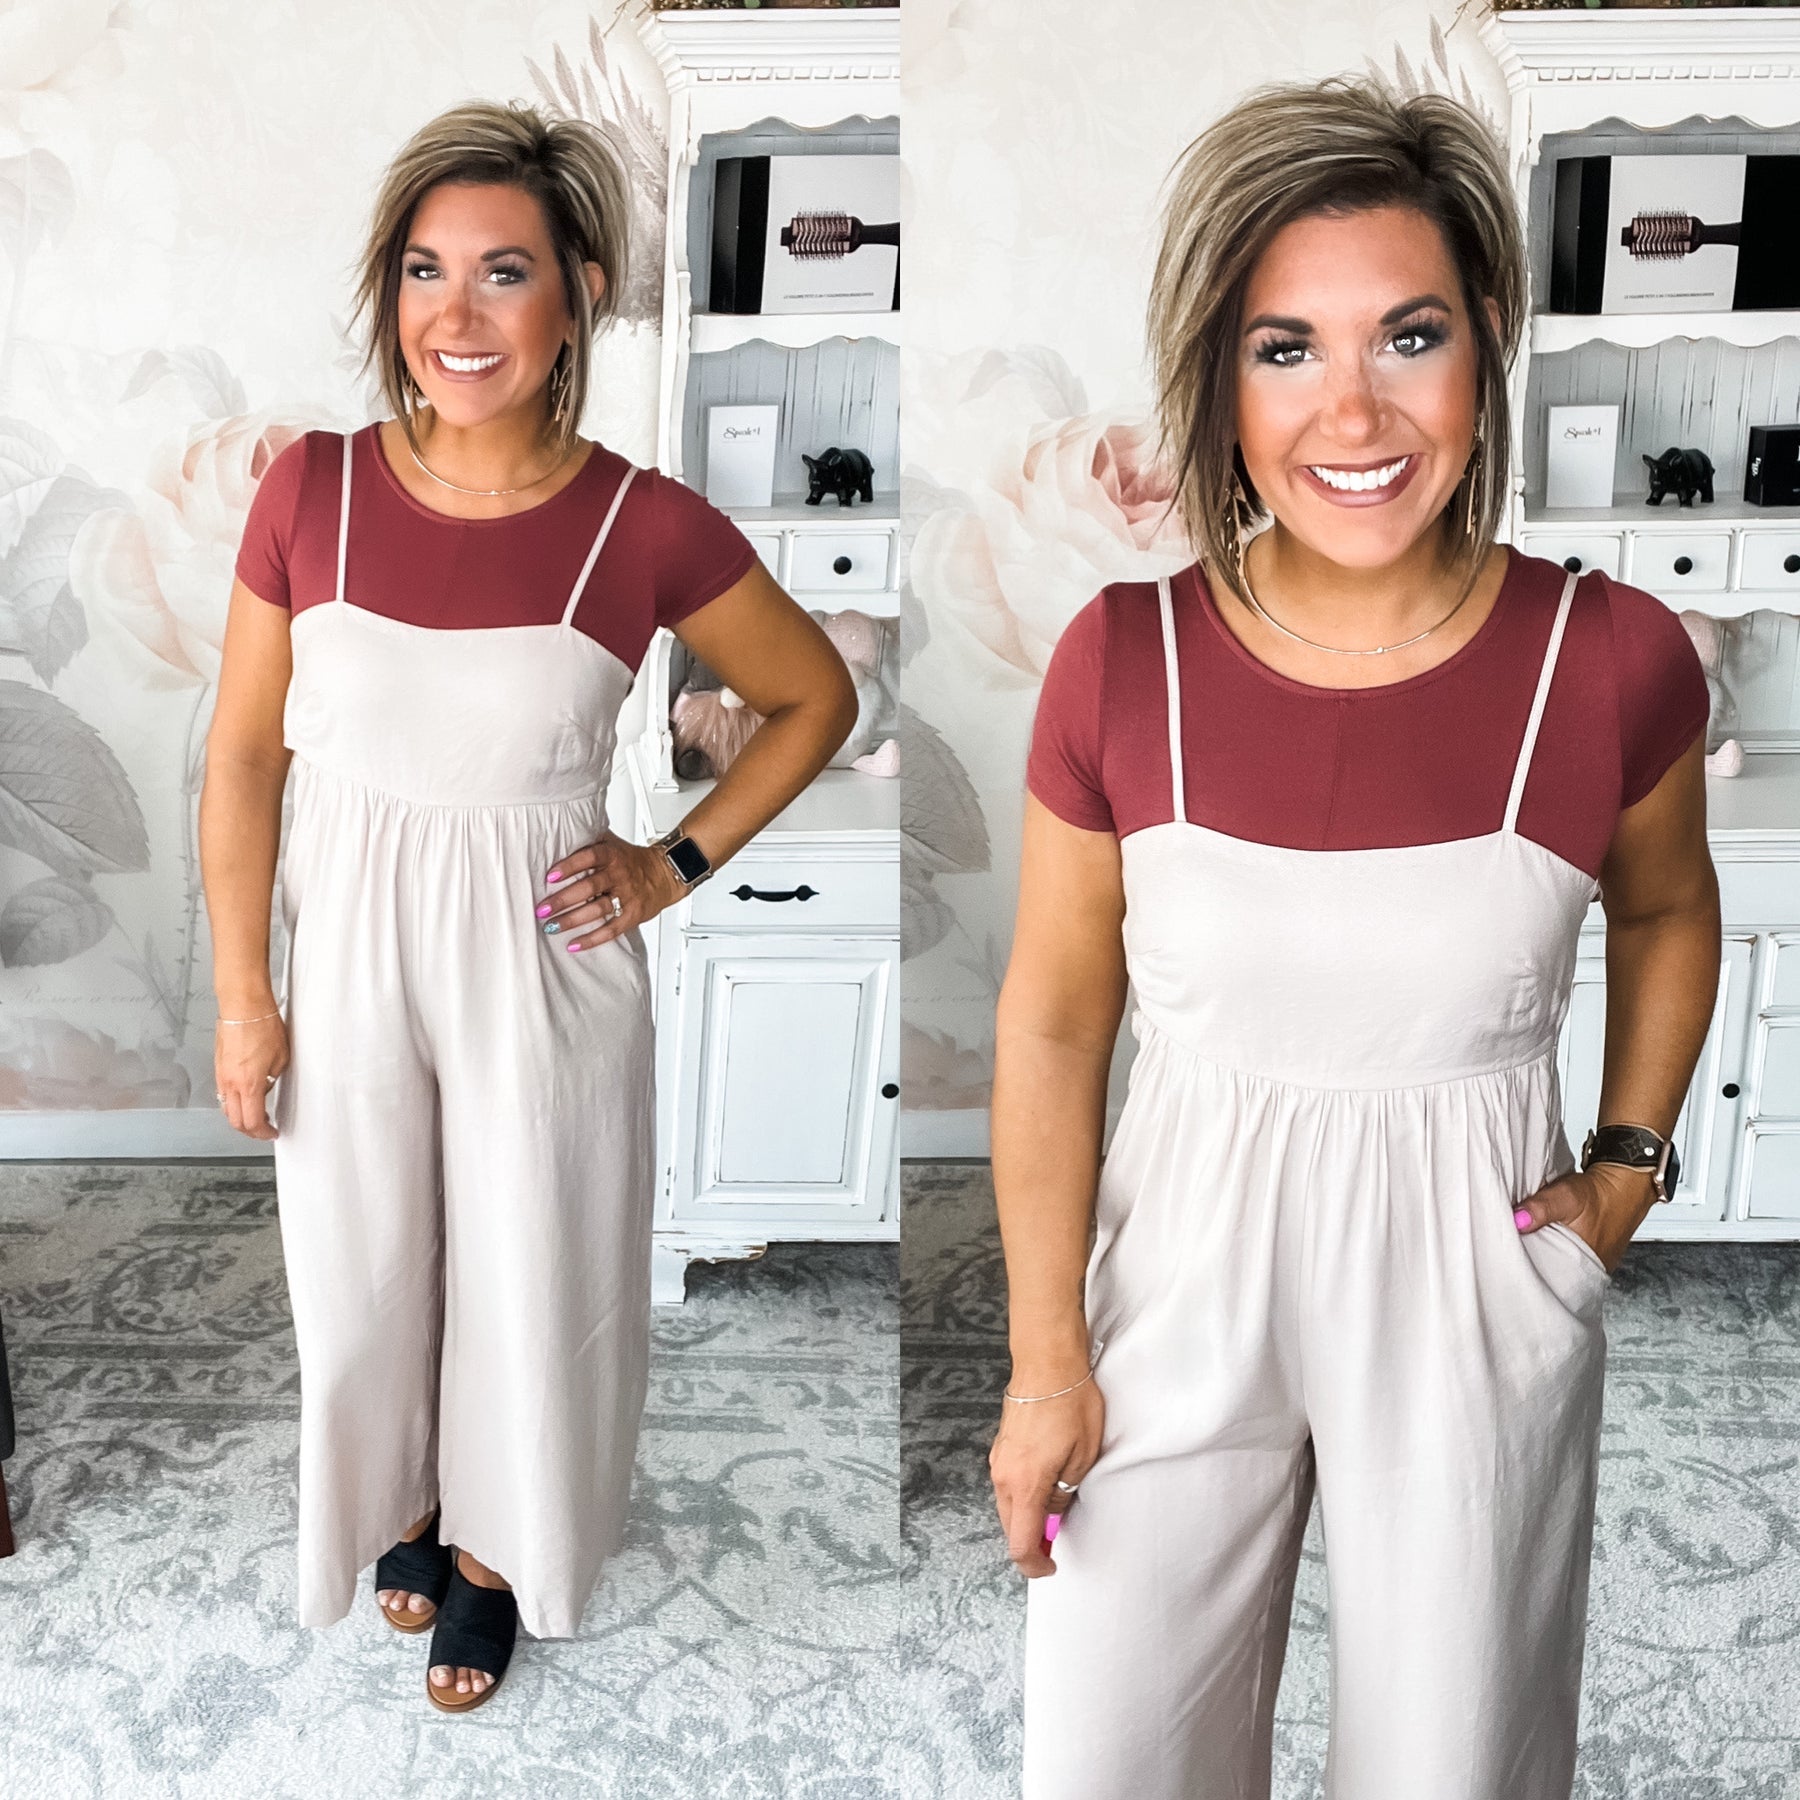 Meet Me in the Afterglow Jumpsuit